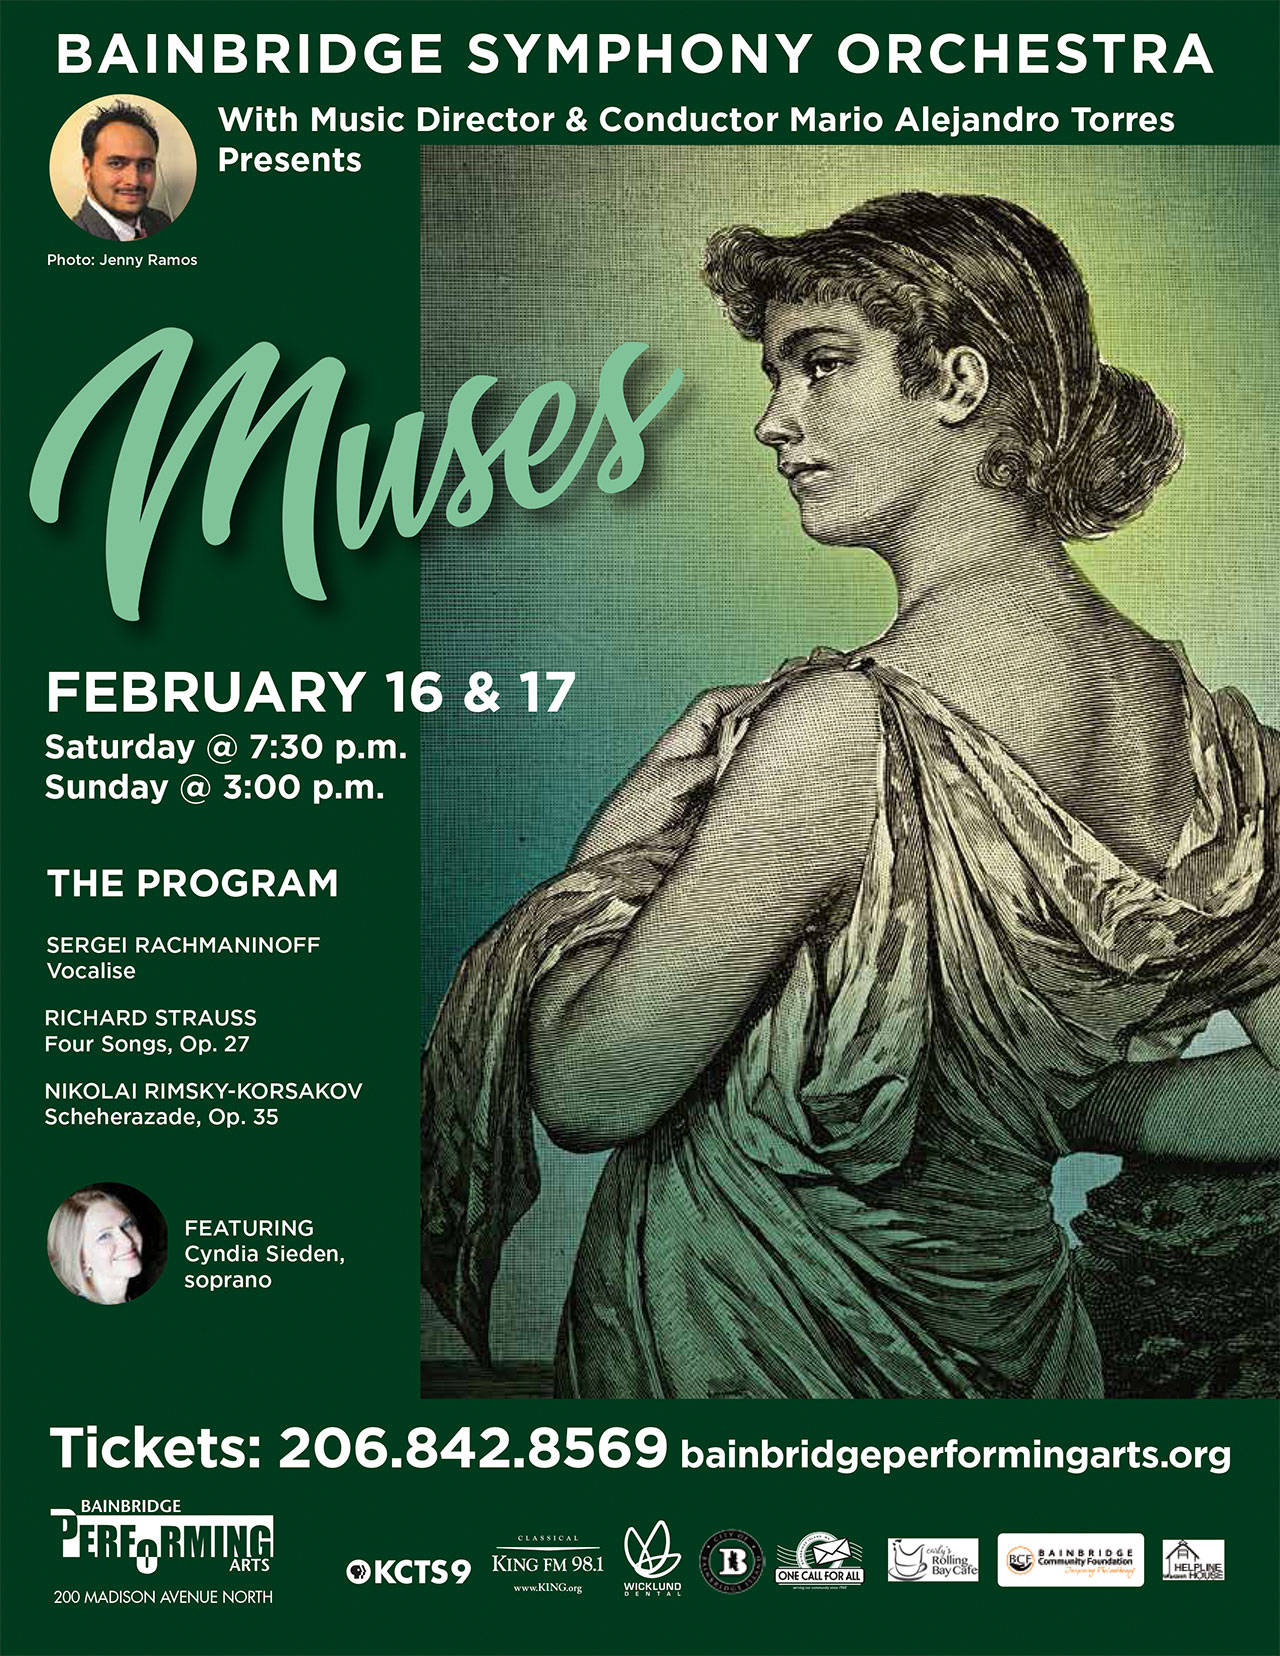 Image courtesy of Bainbridge Performing Arts | Two special guests will highlight the Bainbridge Symphony Orchestra’s latest production: “Muses,” on stage at Bainbridge Performing Arts at 7:30 p.m. Saturday, Feb. 16 and 3 p.m. Sunday, Feb. 17.